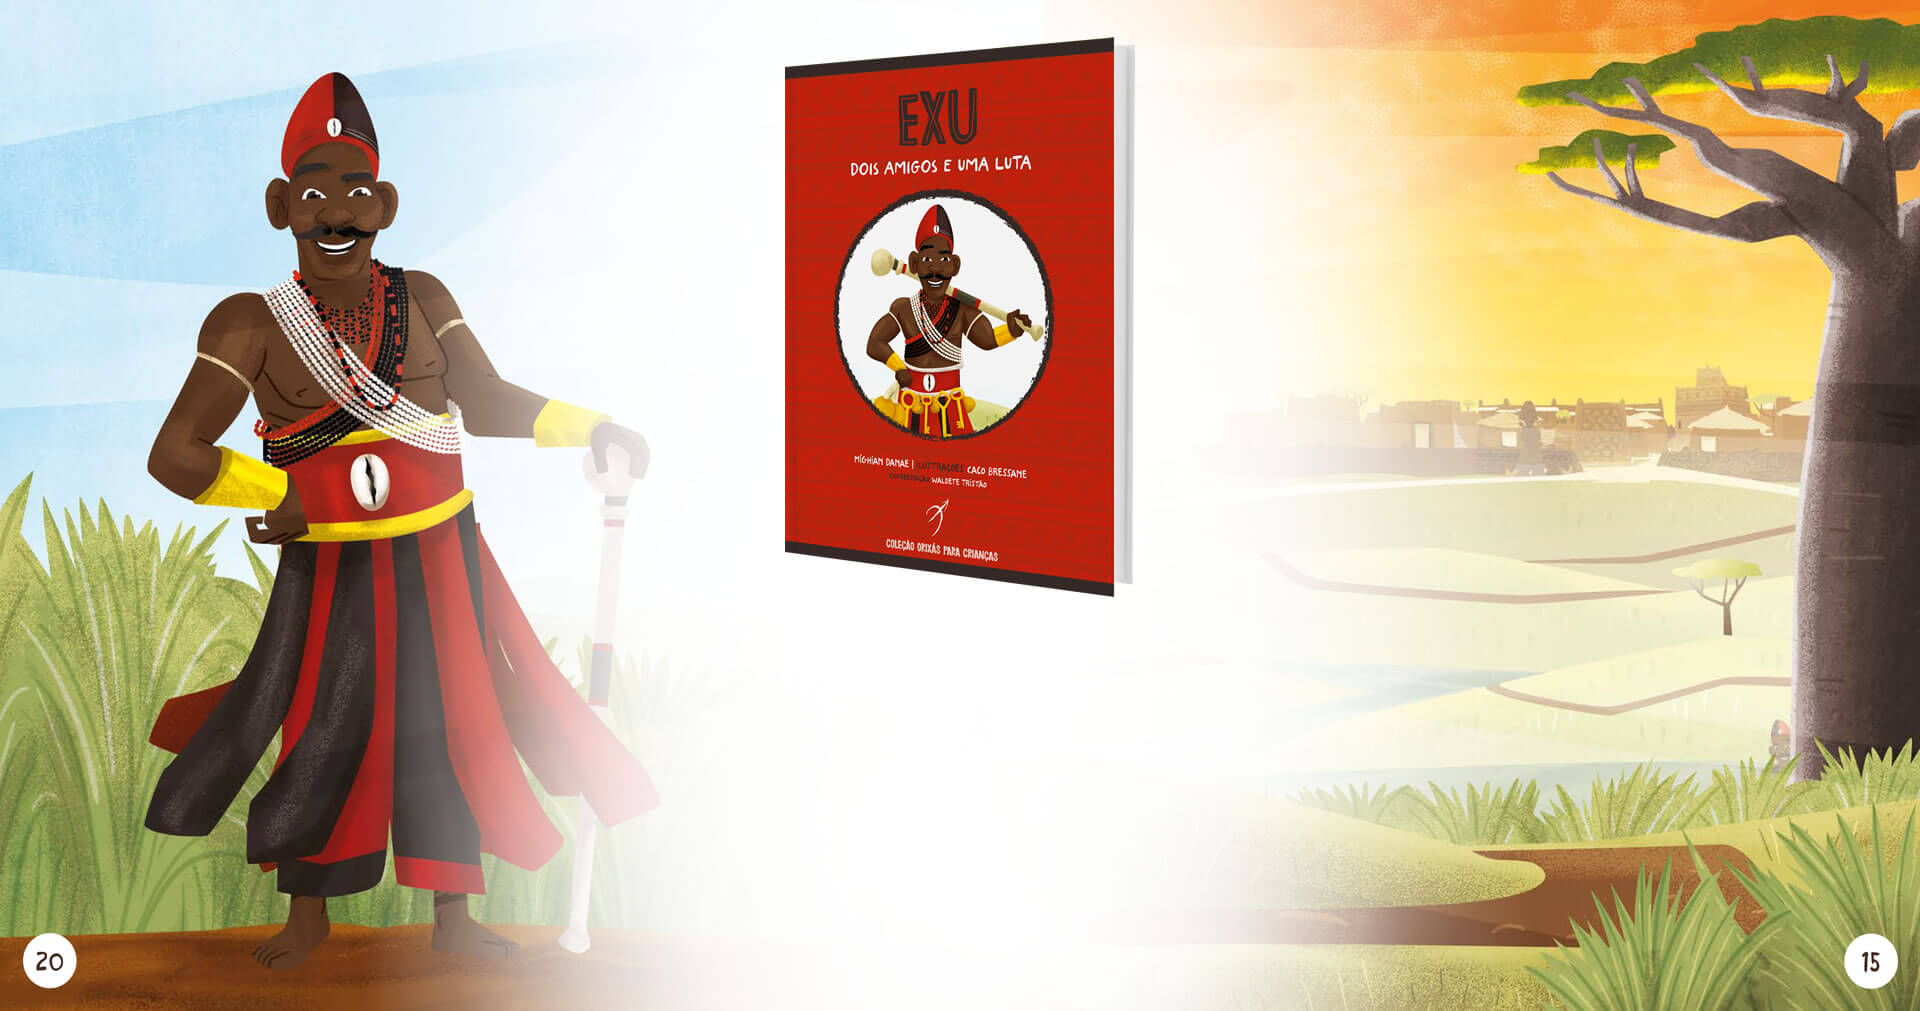 Press Release | Arole Cultural releases “Eshu: two friends and a fight”, volume two of “The Orishas Book For Children” collection